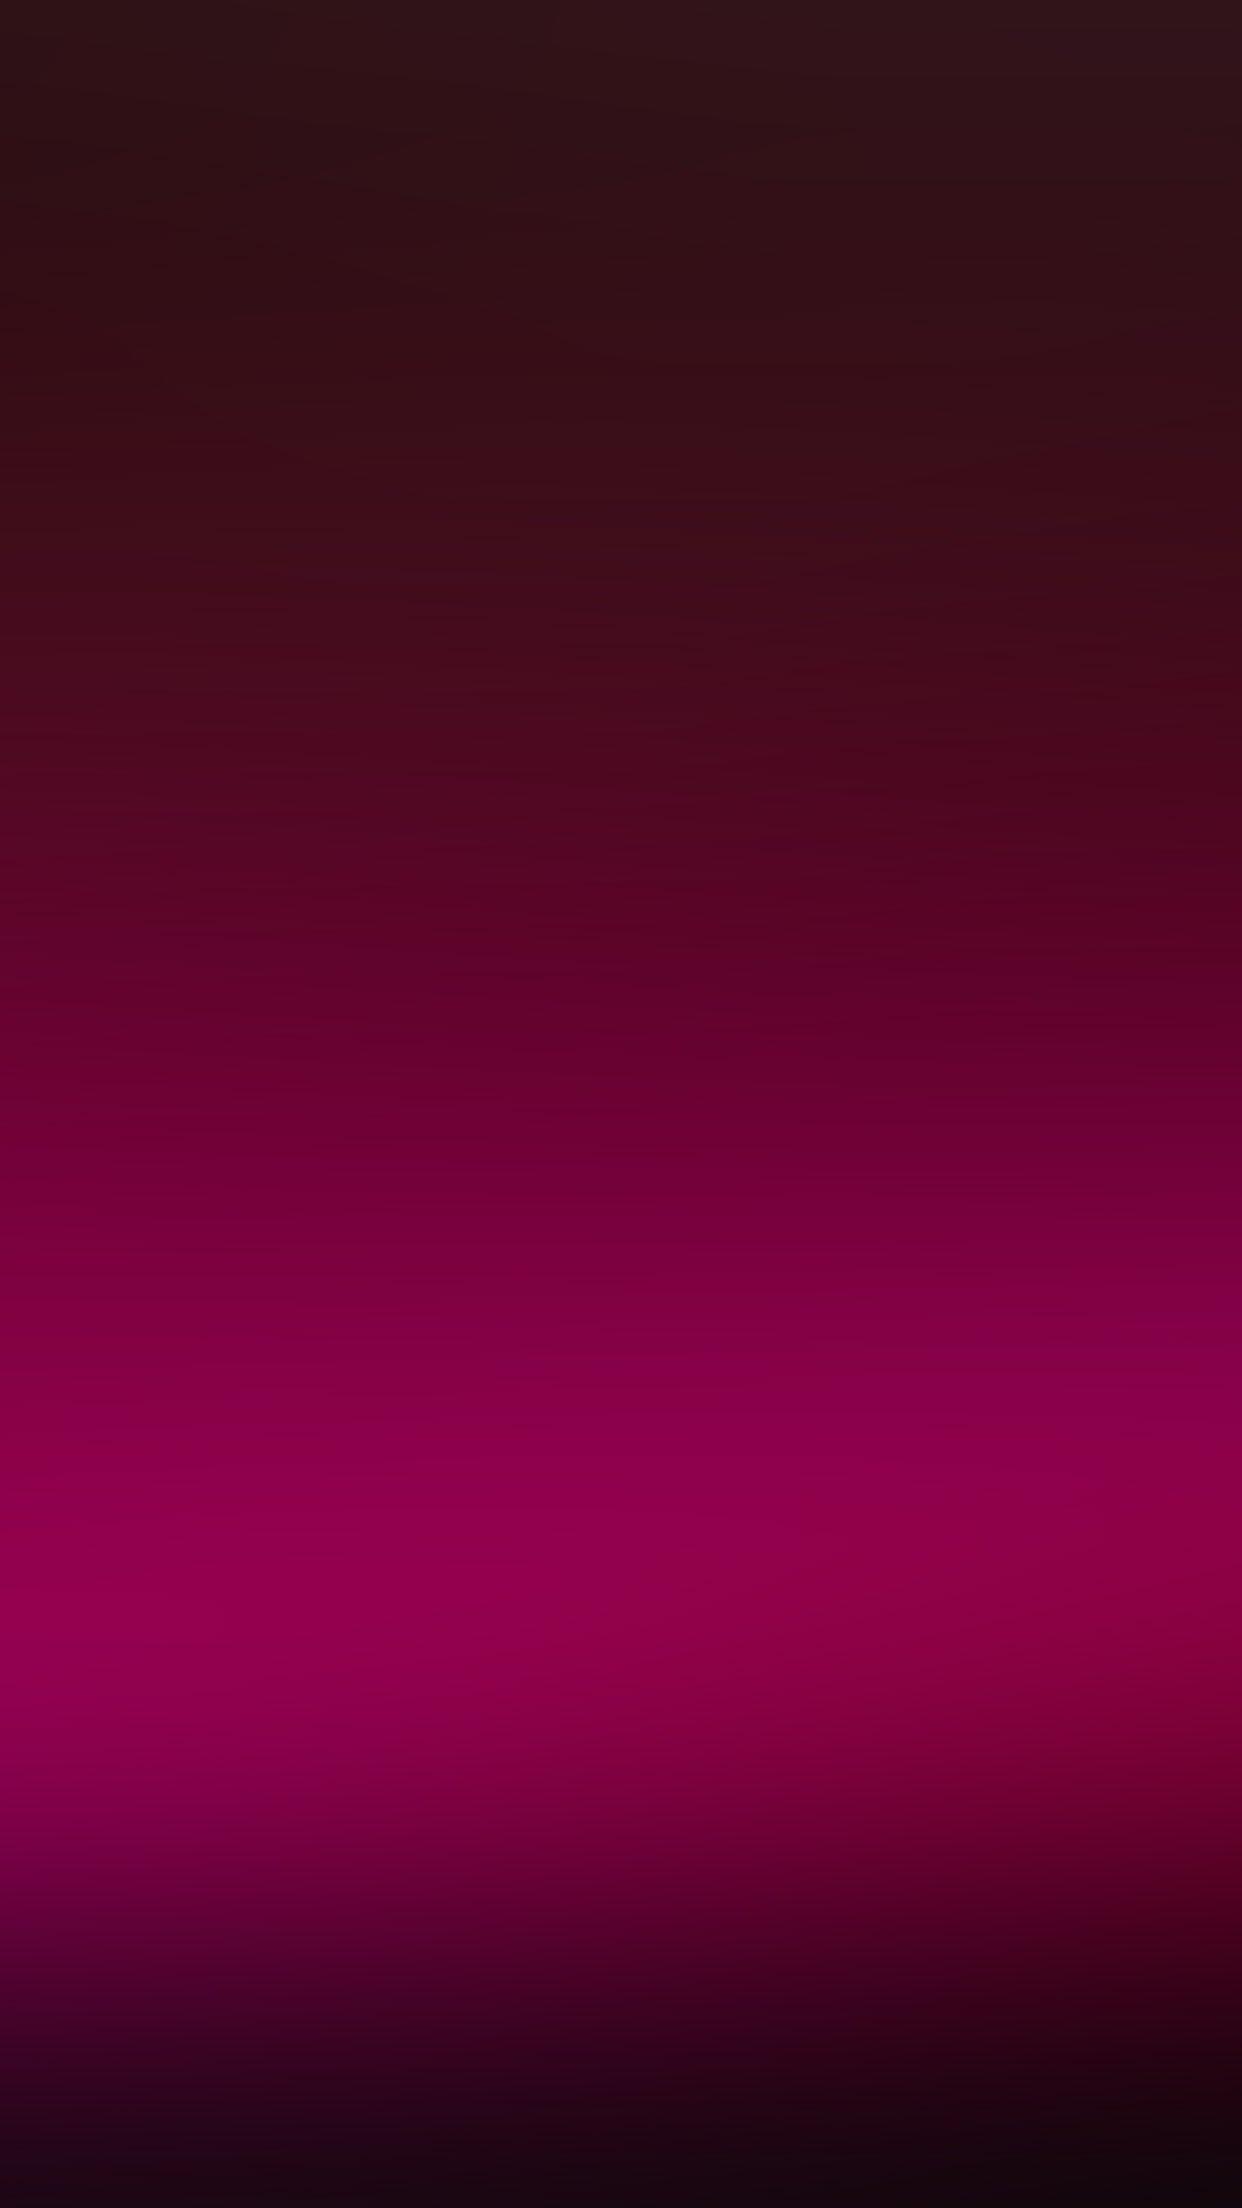 Dark Pink Background Stock Photos, Images and Backgrounds for Free